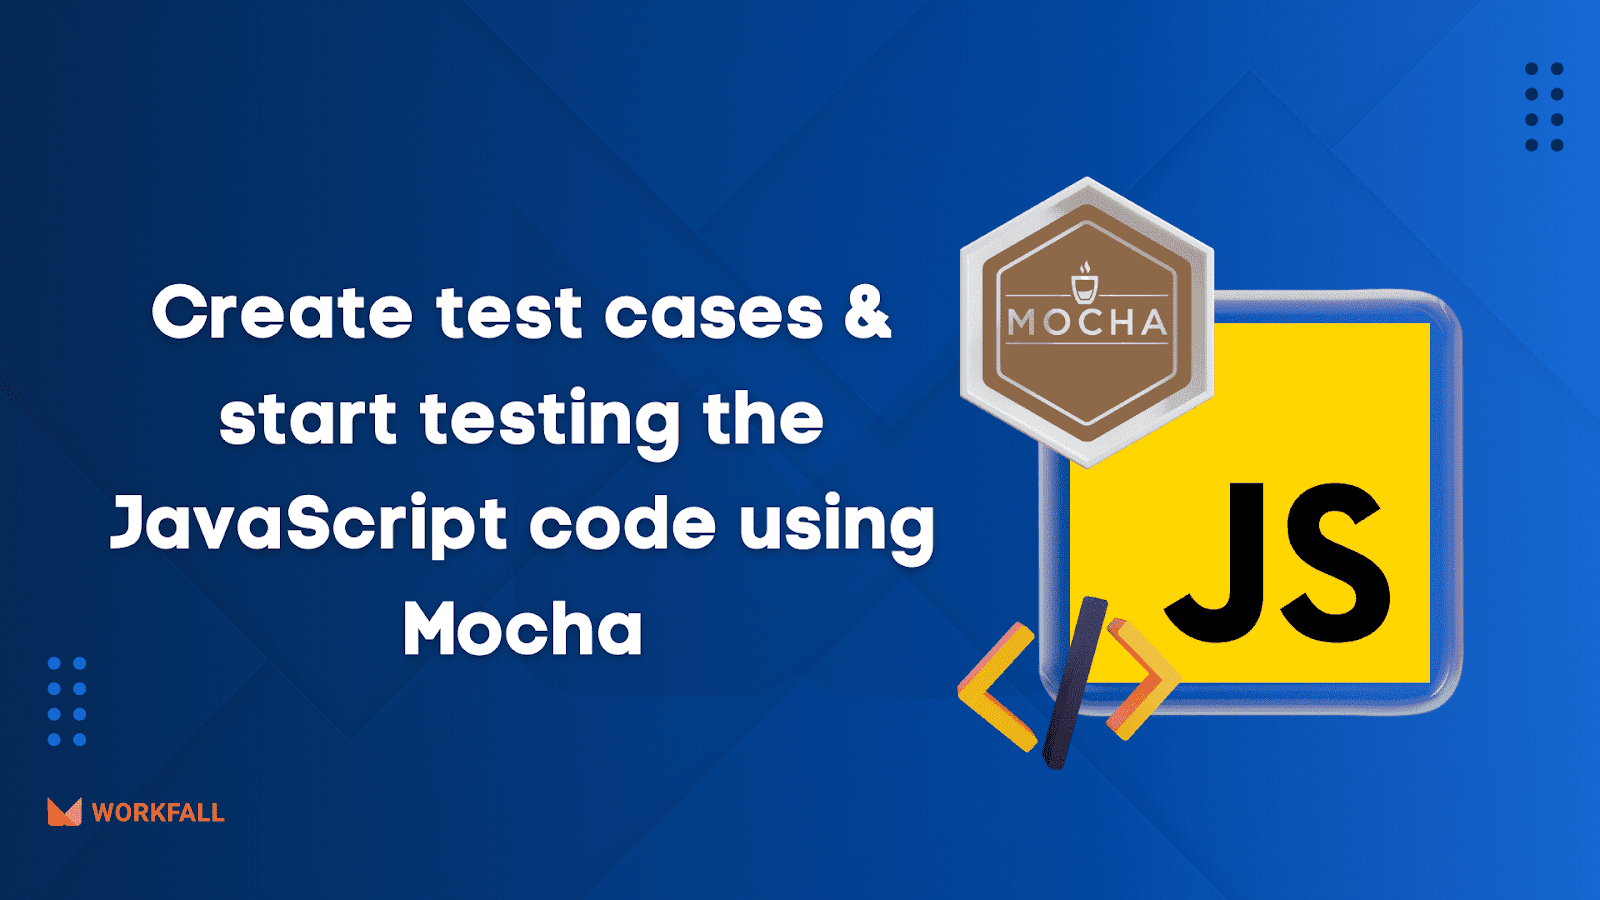 How to create test cases and start testing the JavaScript code using Mocha?